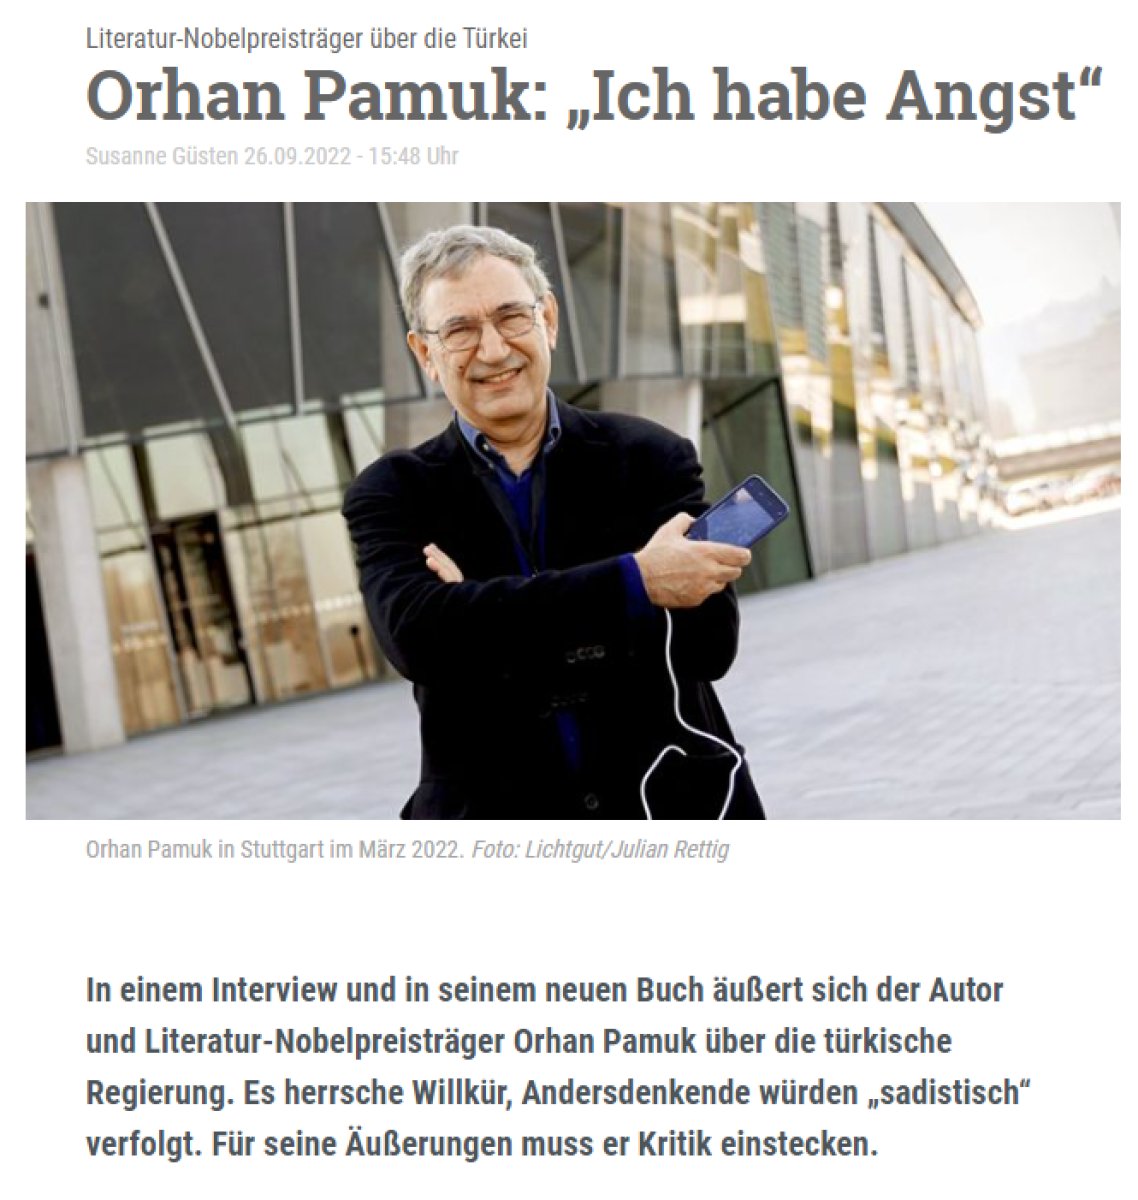 Orhan Pamuk's words I'm afraid #1 in the German press